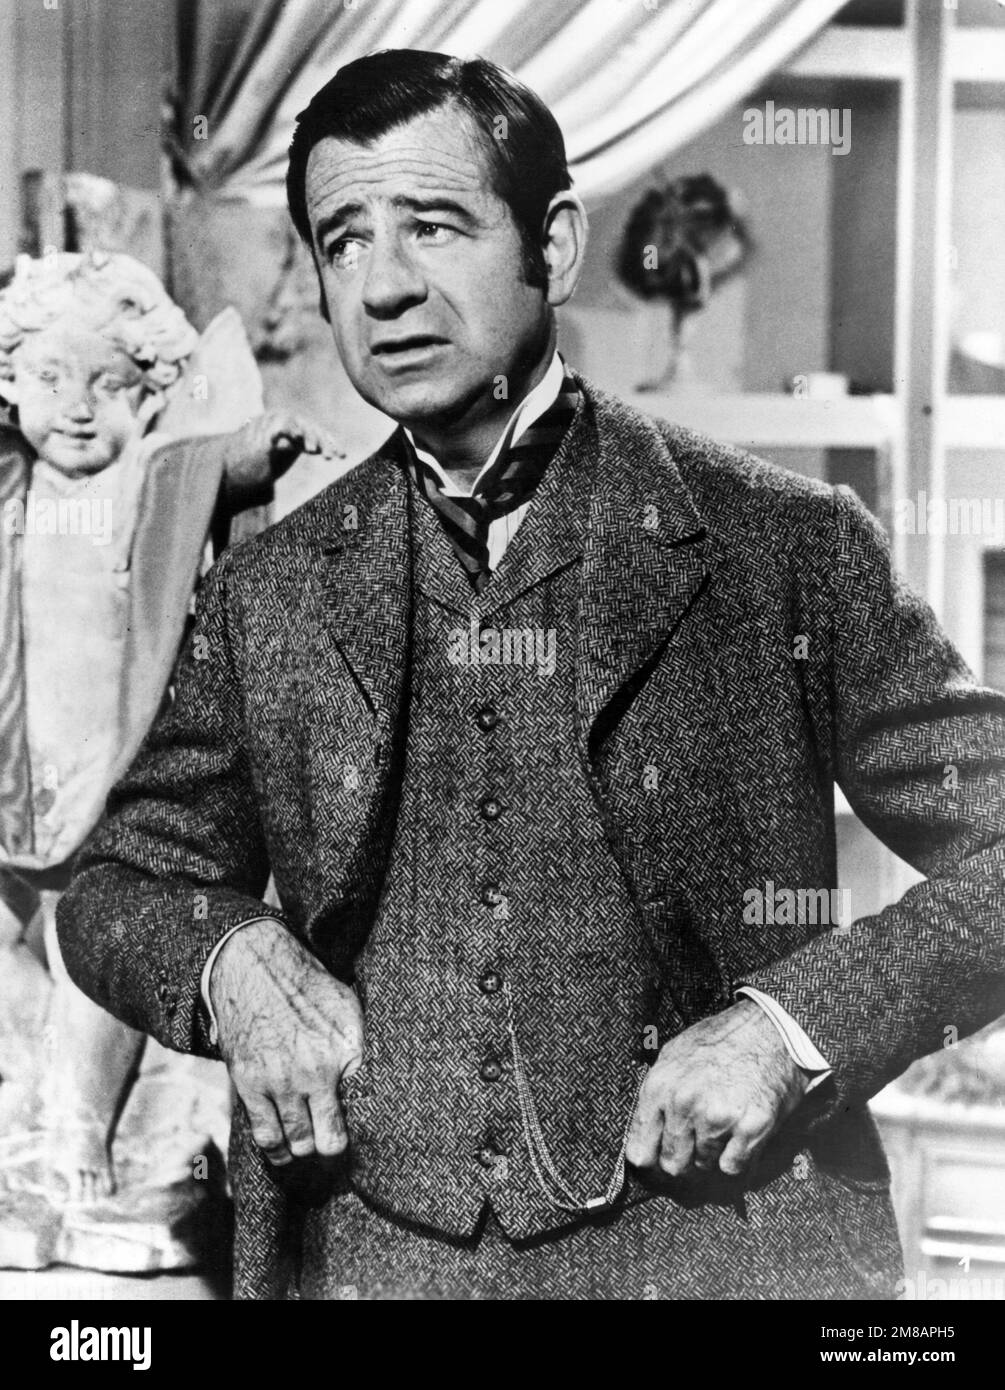 WALTER MATTHAU in HELLO, DOLLY! (1969), directed by GENE KELLY. Credit:  20TH CENTURY FOX/CHENAULT PRODS. / Album Stock Photo - Alamy